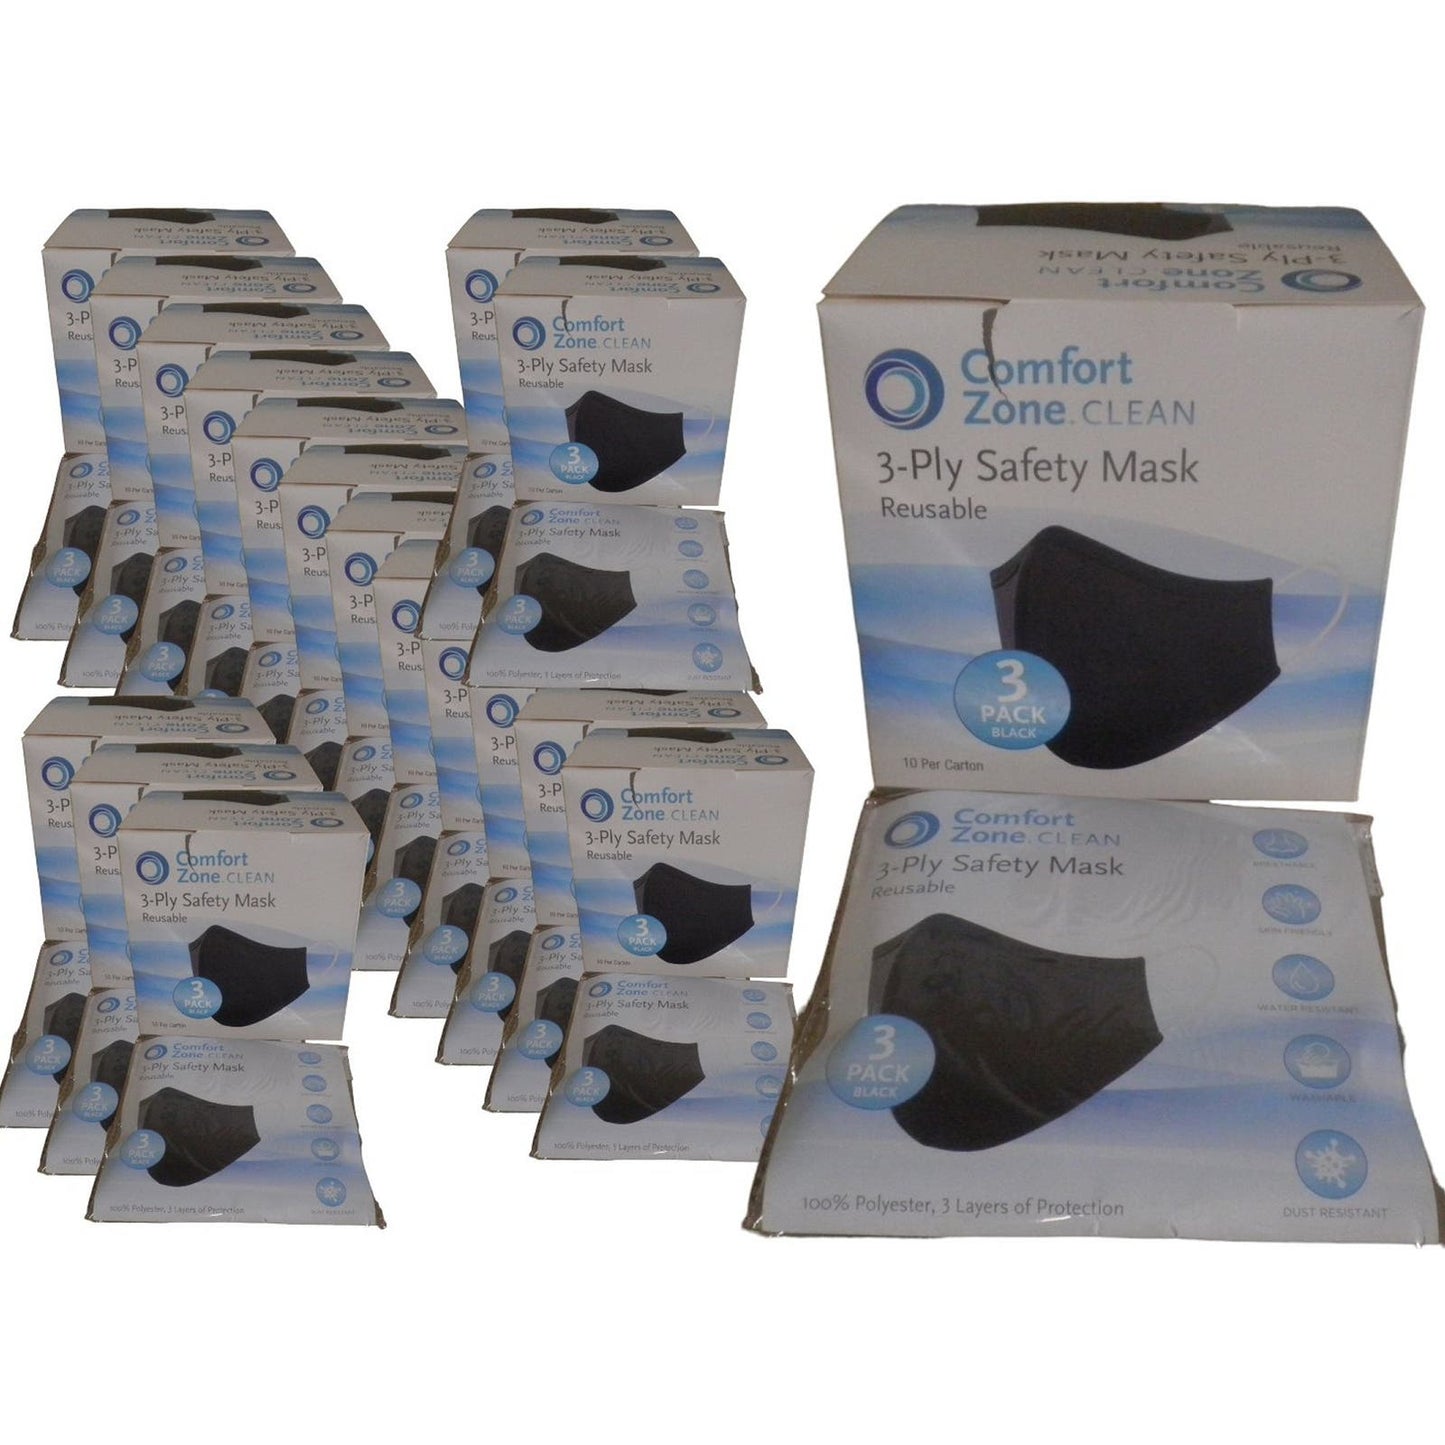 540 Ct. Case- Reusable Fabric Mask, 180-PKS of 3, 3-Layer, Black, 100% Polyester [Local Pickup Clearance $25 Per Case of 540 Mask in Cropwell, AL 35054}